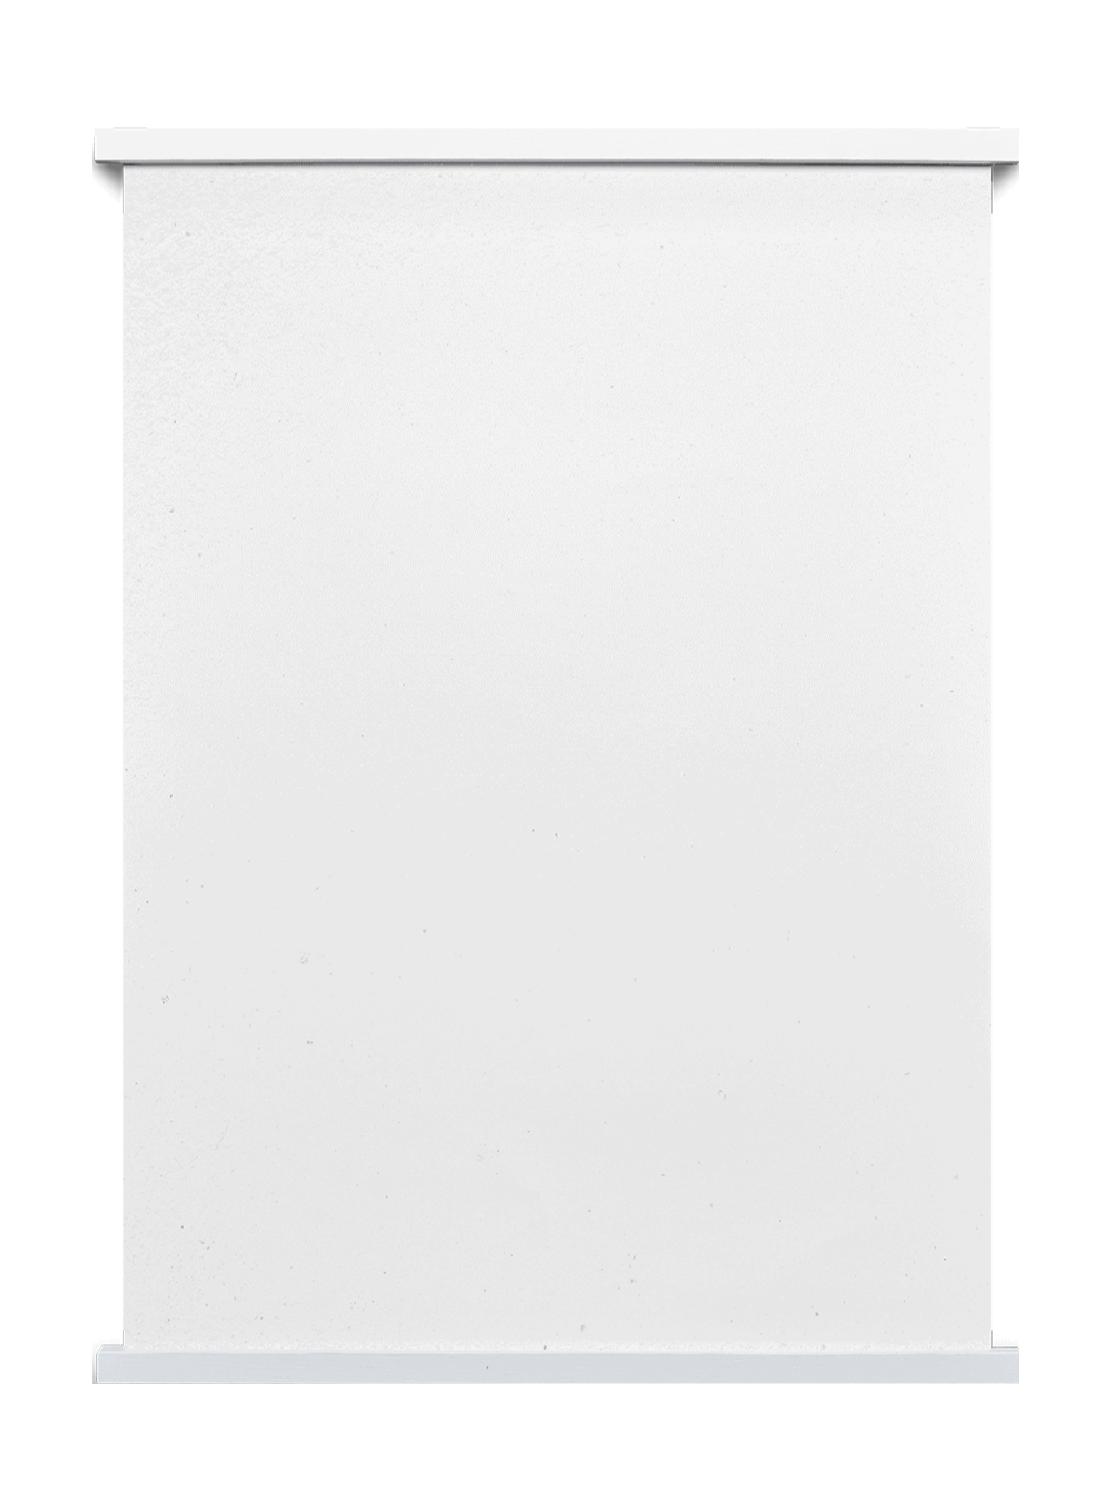 Paper Collective S Tii Cks 33 Magnetic Poster Bar, White